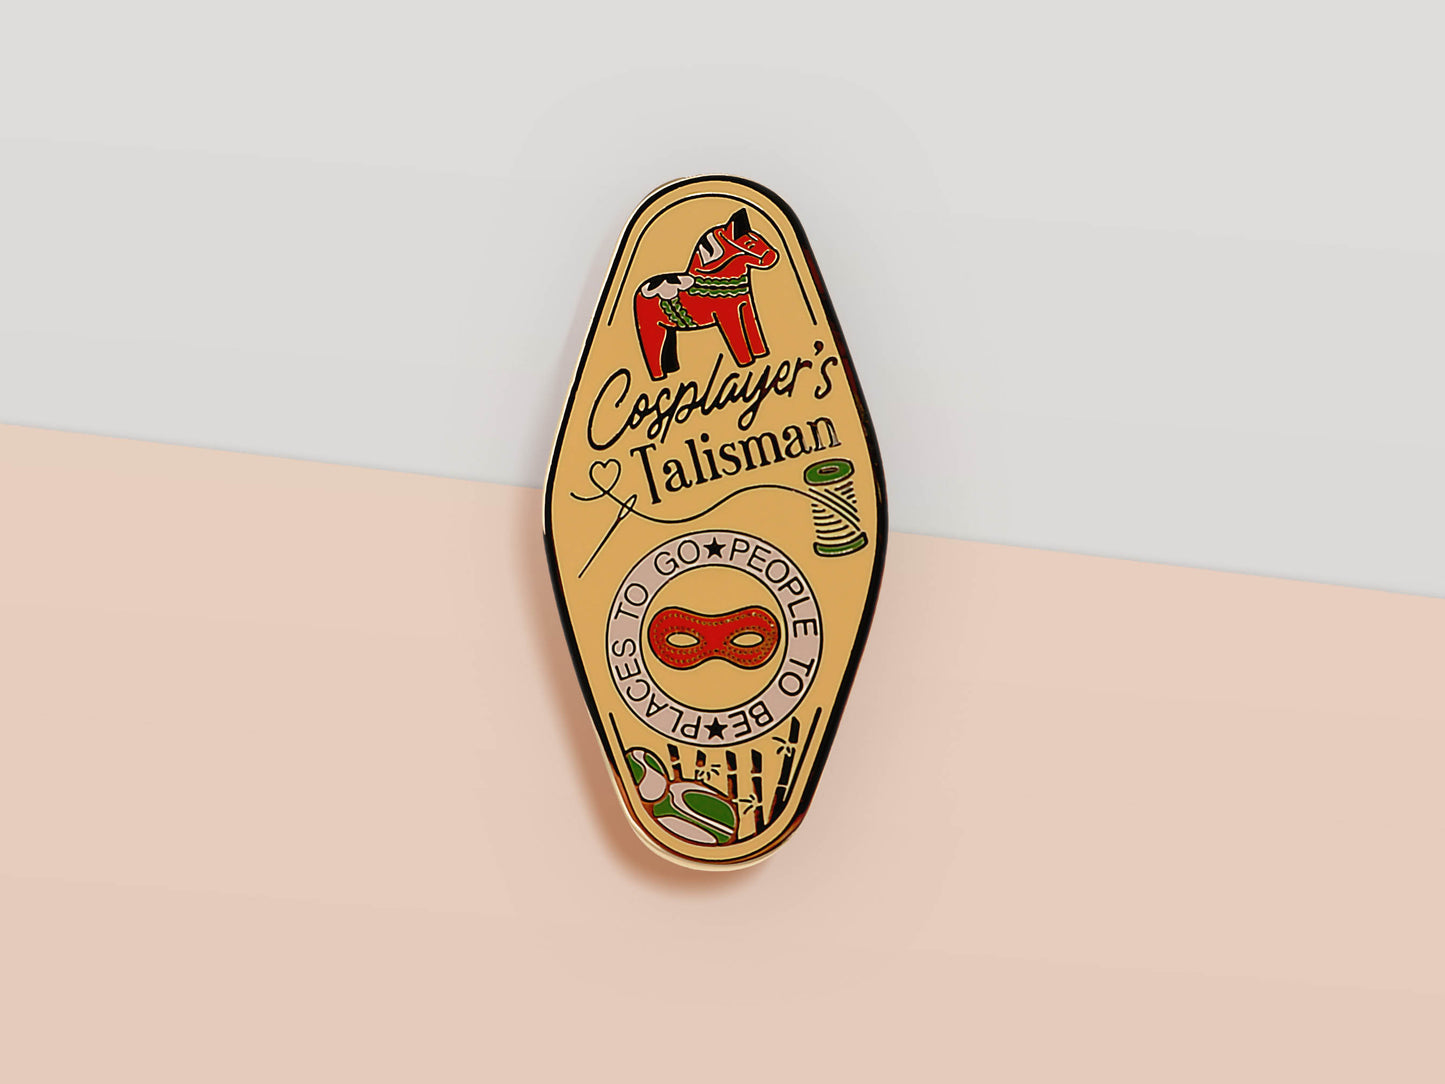 Gold Enamel Talisman Pin with yellow and red design and the words Cosplayer's Talisman, Places To Go People To Be. The pins design includes a mask and needle and thread, a wooden horse, as well as plants and crystals.